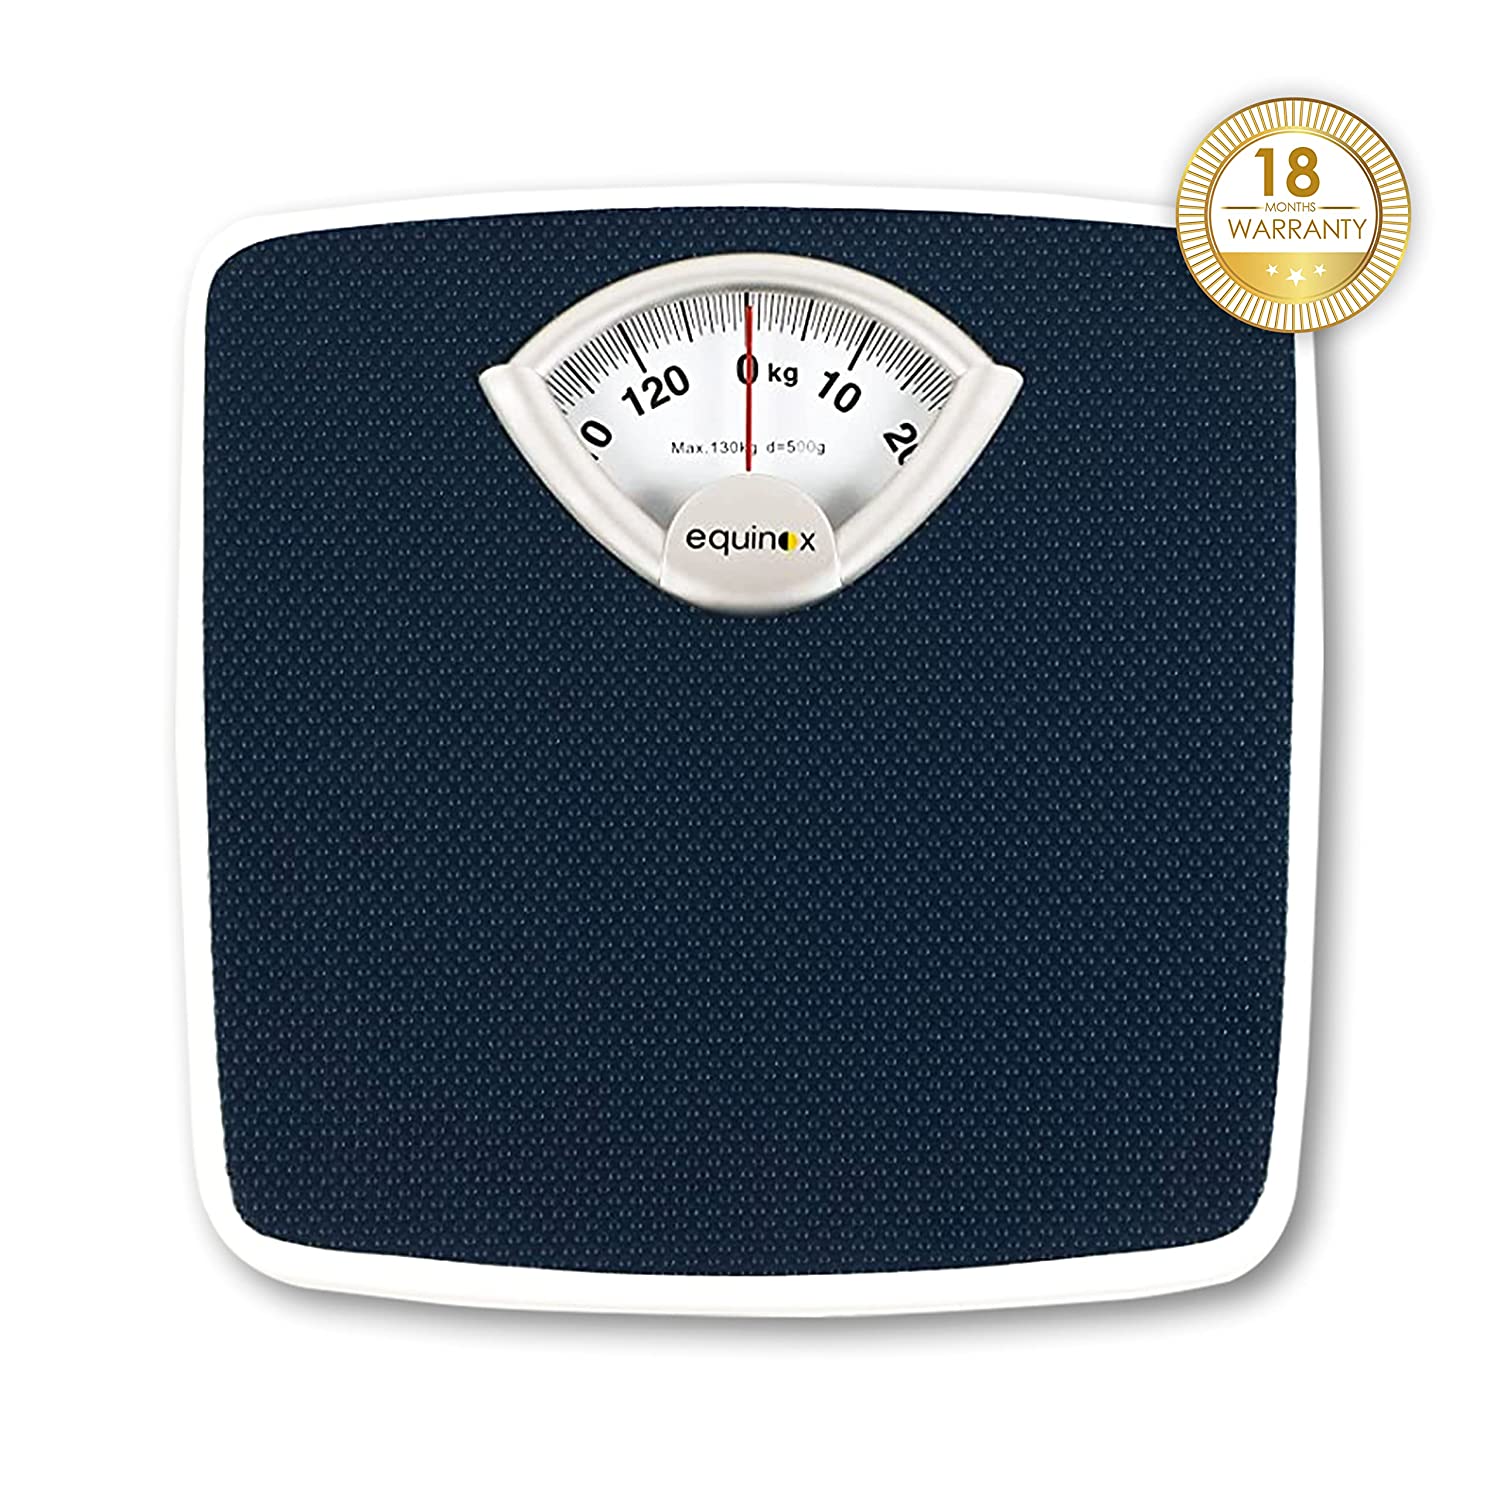 Equinox Personal Weighing Scale-Mechanical EQ-BR-9201